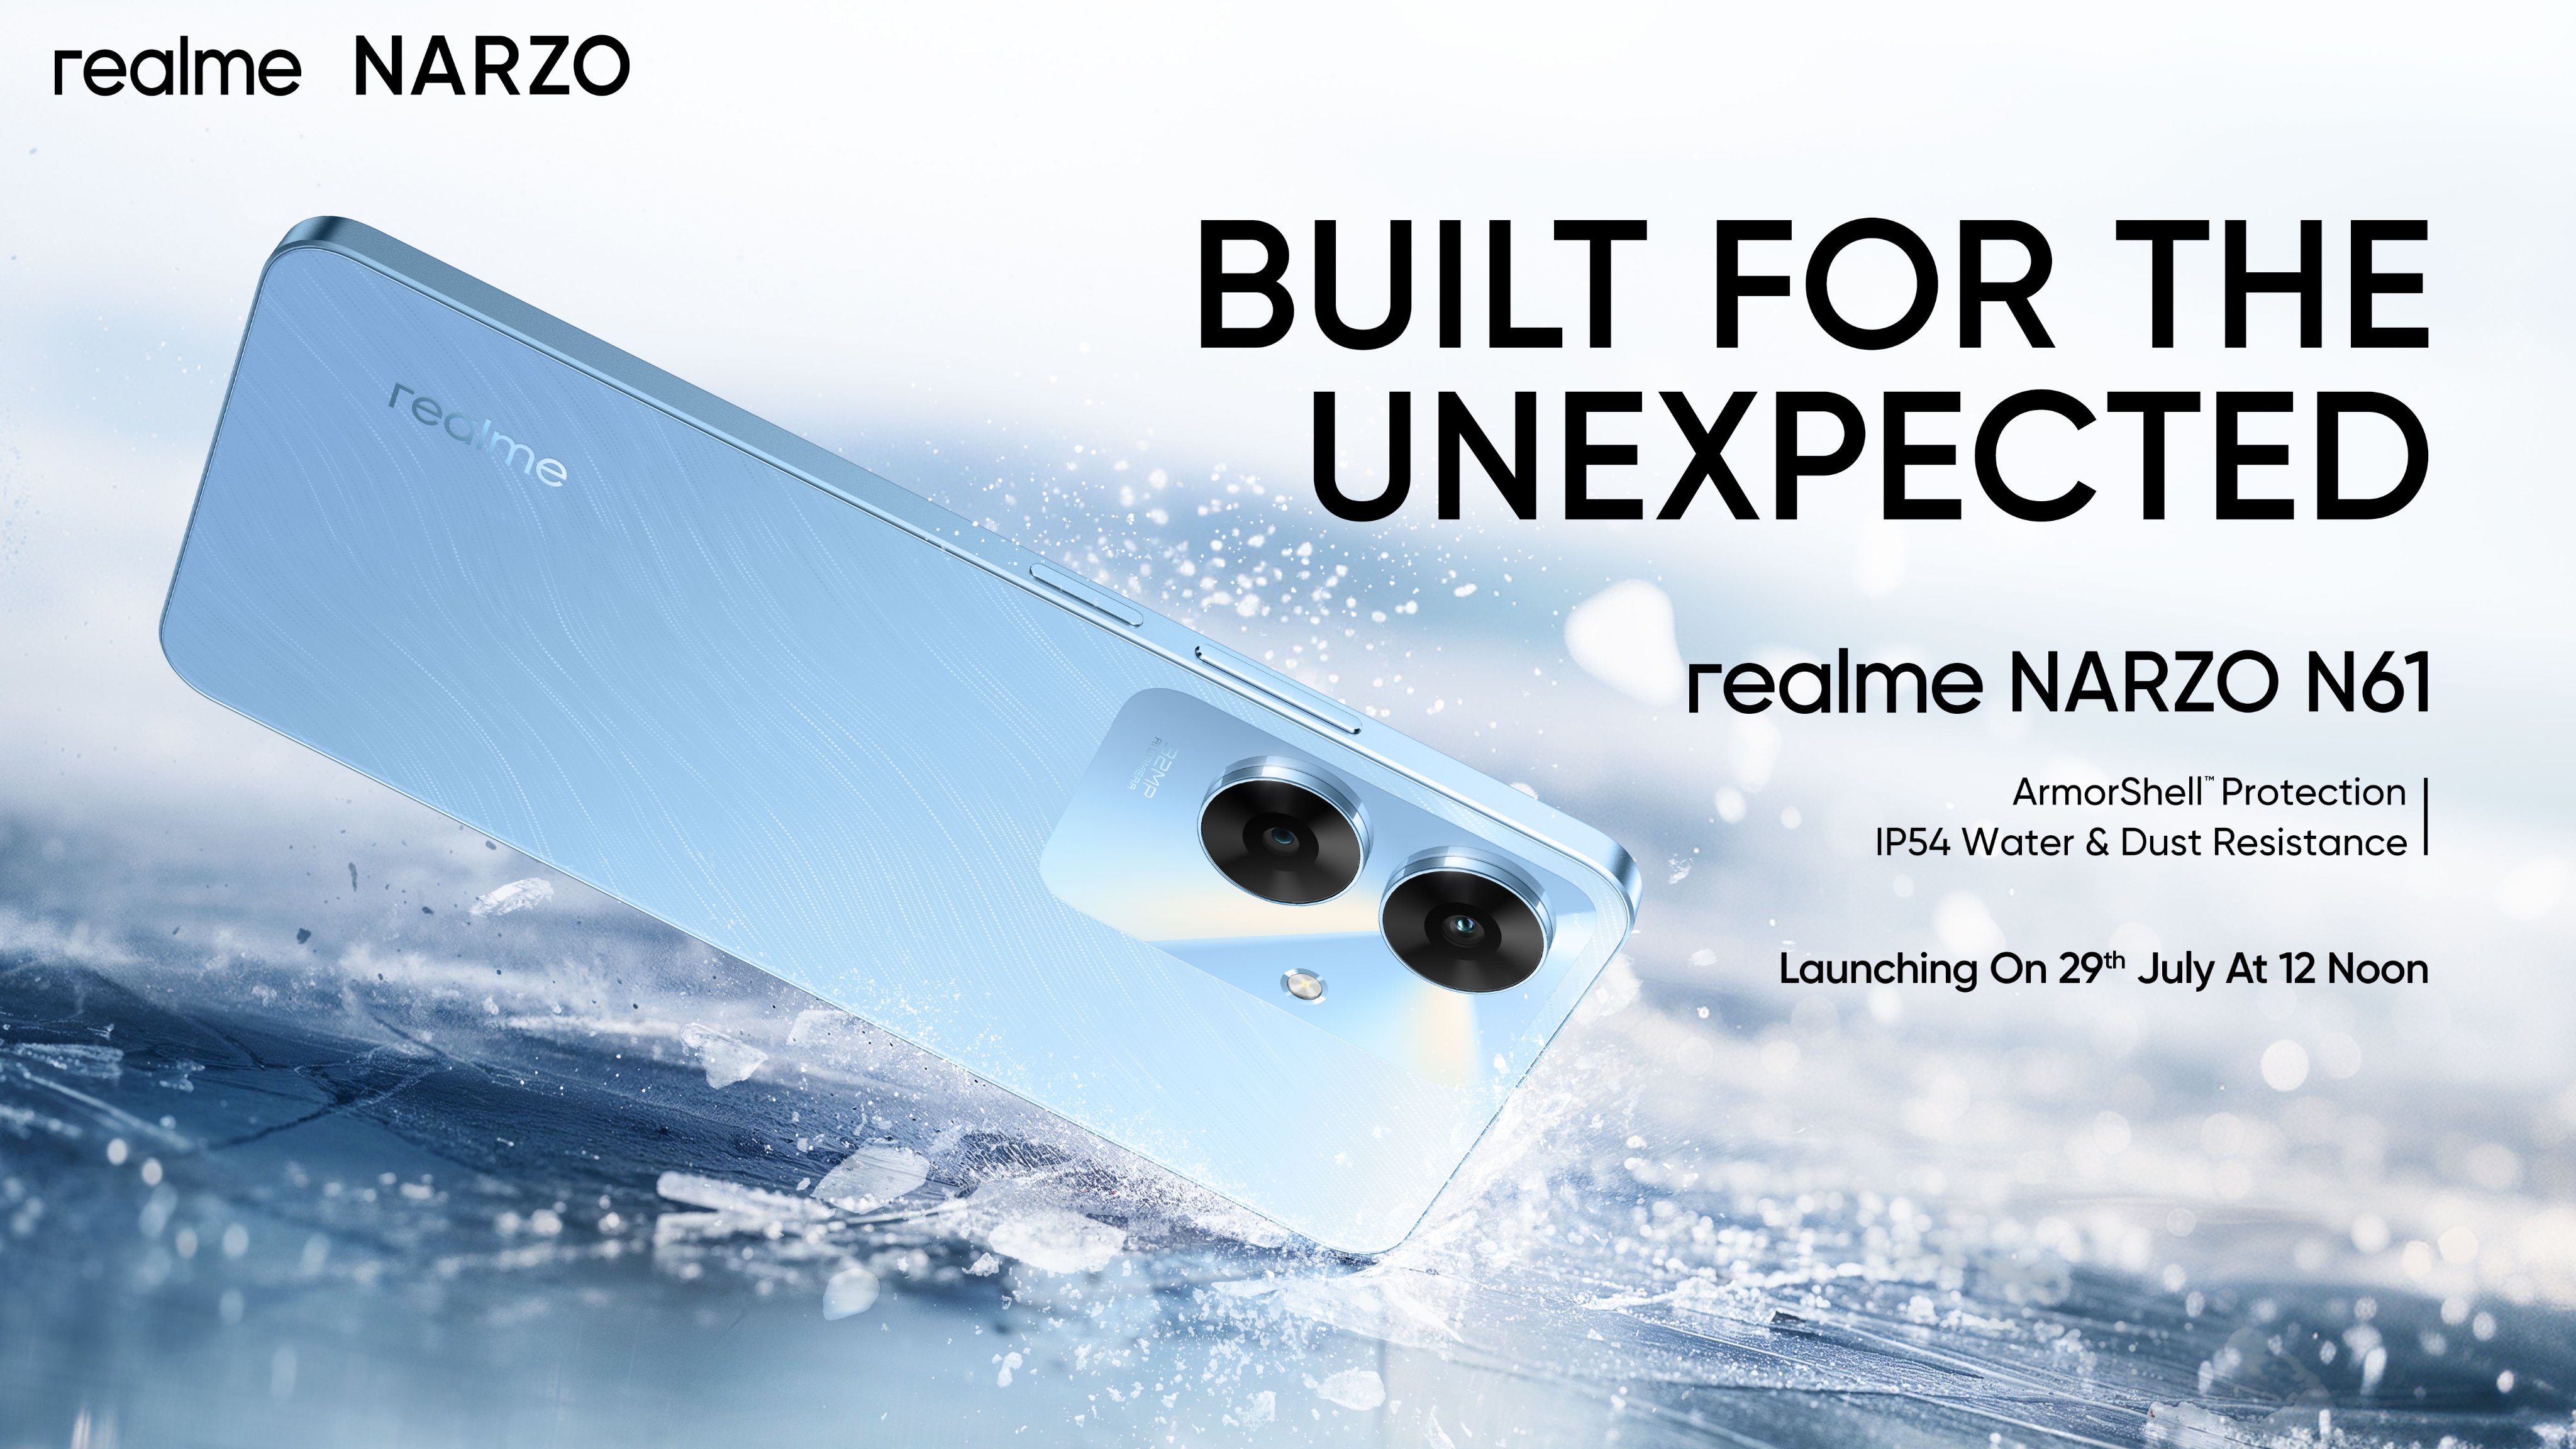 Official: realme Narzo N61 with IP54 protection debuts on 29 July